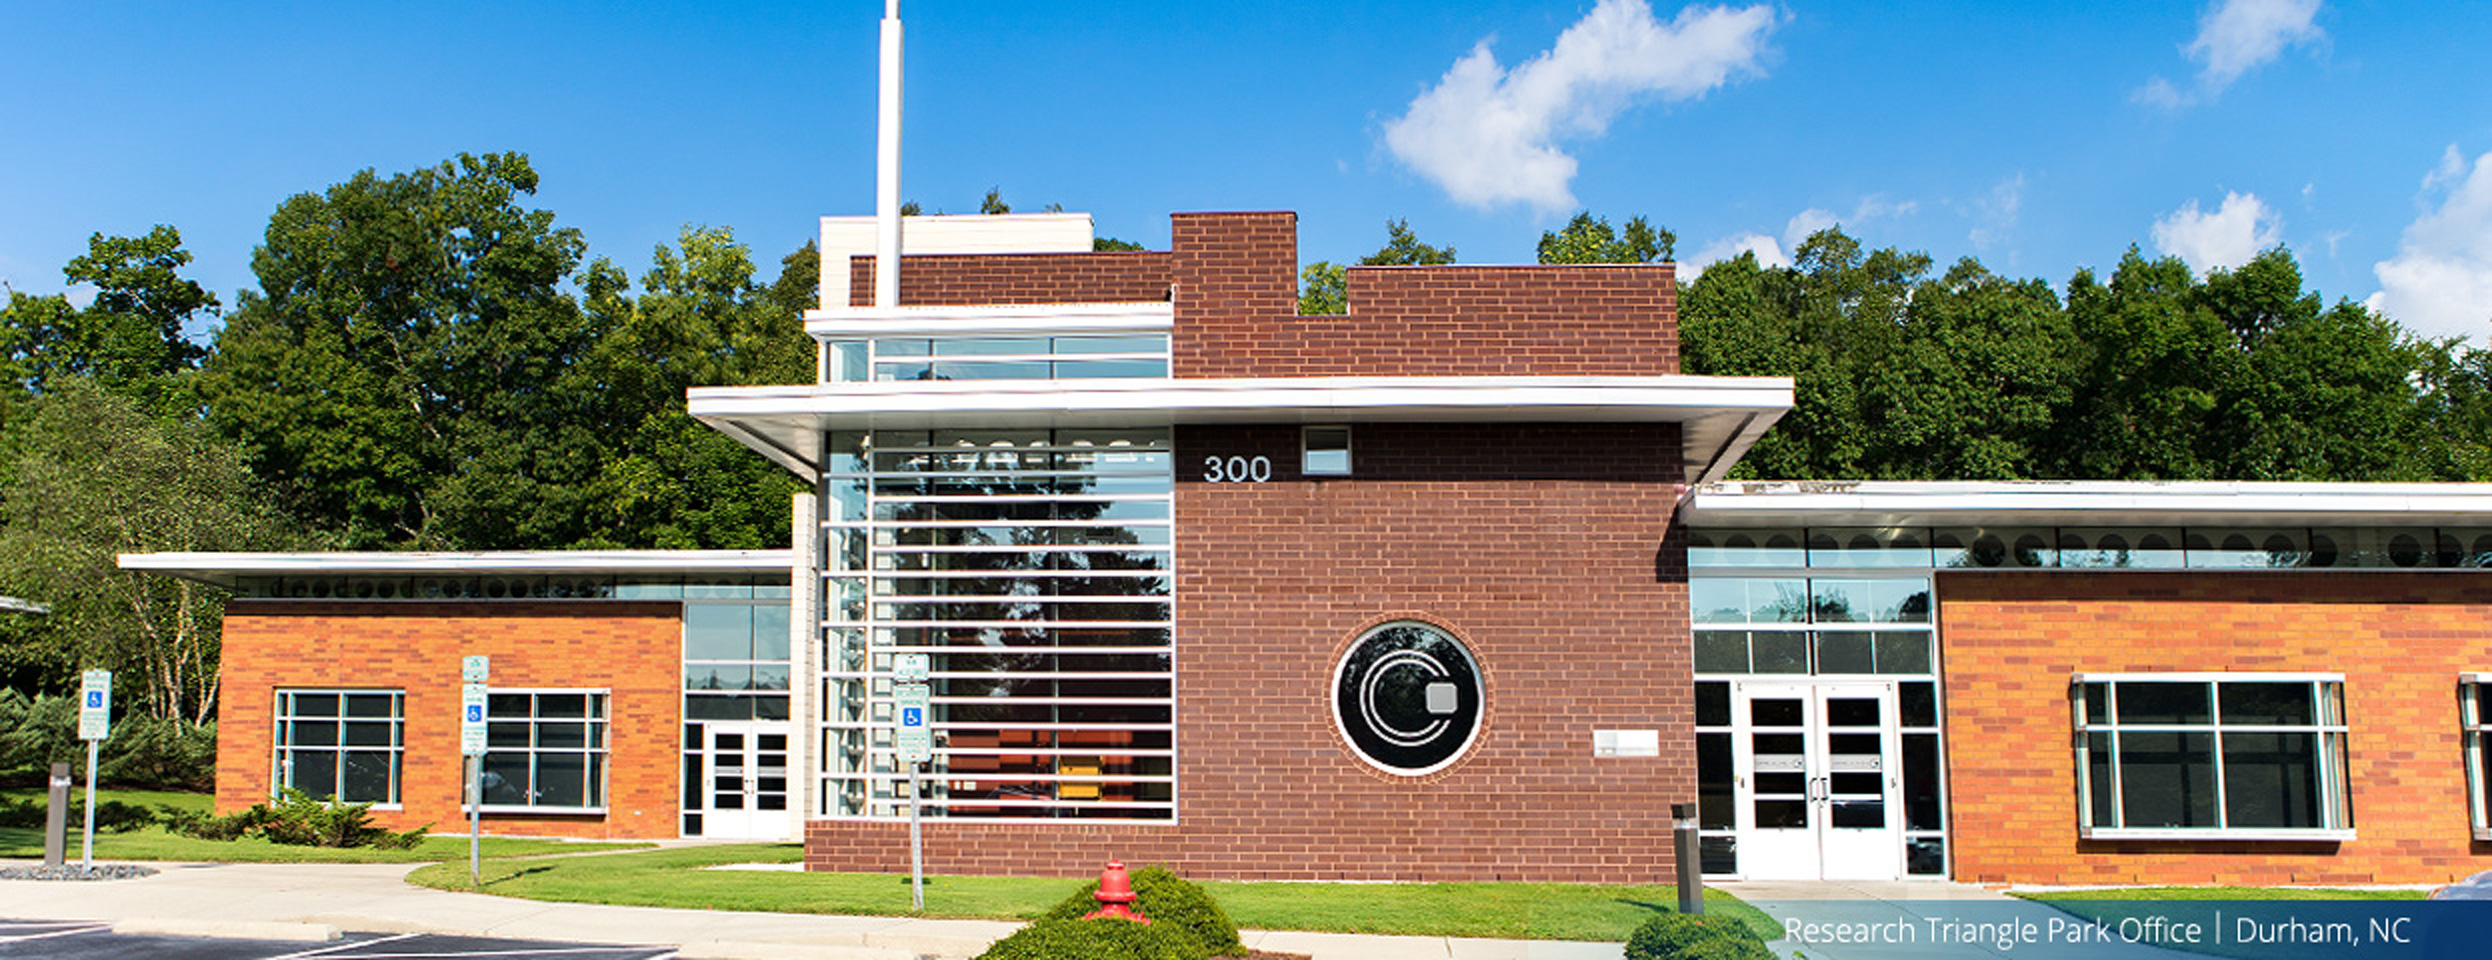 Research Triangle Park Office | Durham, NC